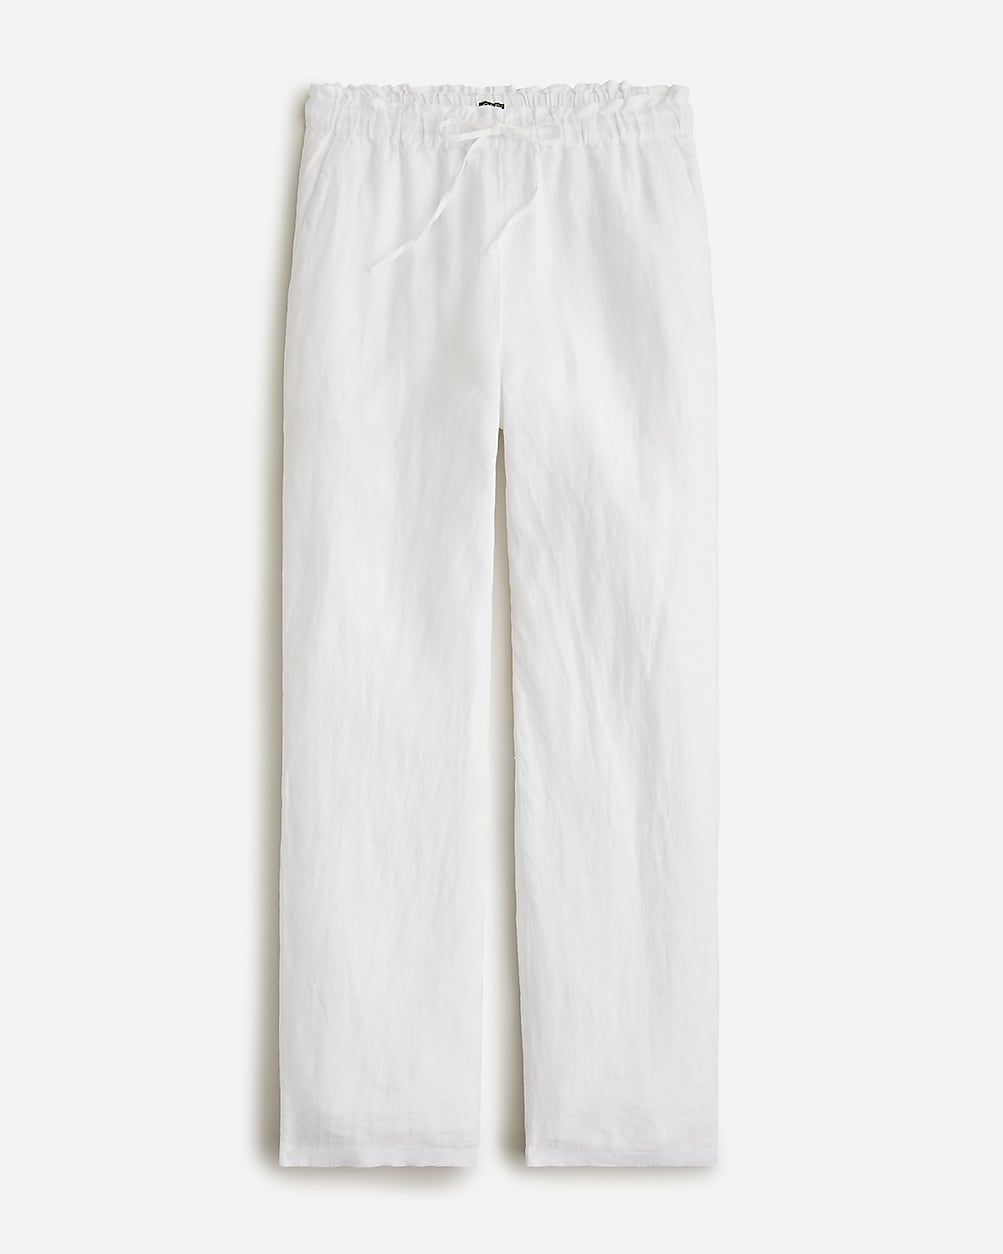 Your browser does not support videoShop this looknew colorSoleil pant in linen$98.00White$98.00$9... | J.Crew US